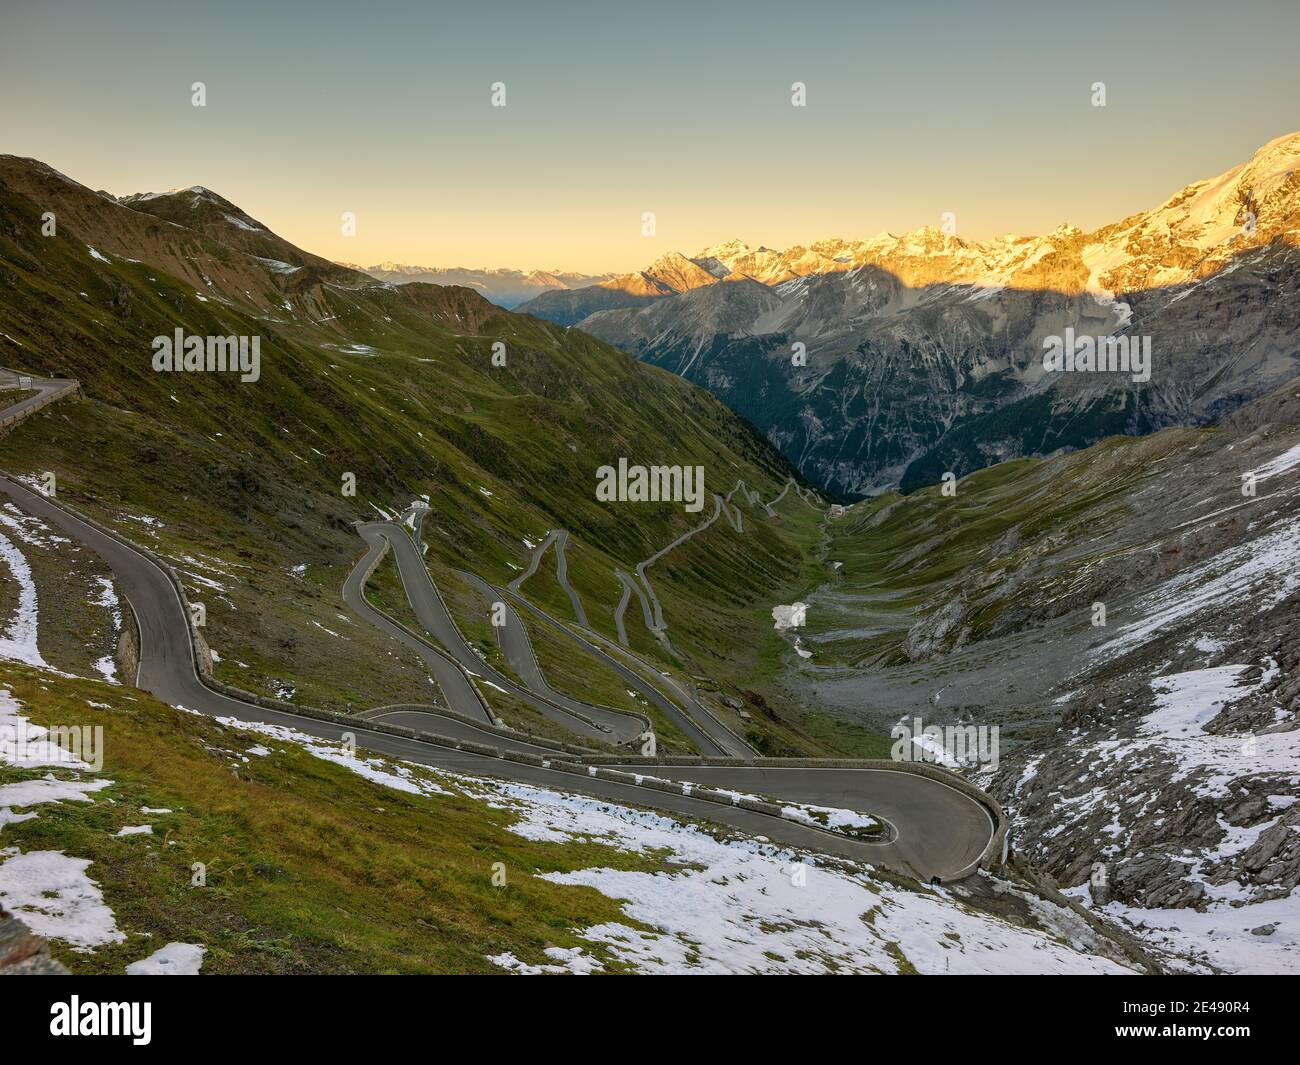 Pass road, pass road, alpine pastures, rocks, peaks, glaciers, snow, onset of winter, blue sky, cloudless, rugged, wild, evening mood, evening light, autumn, late summer, September, curves, serpentines Stock Photo